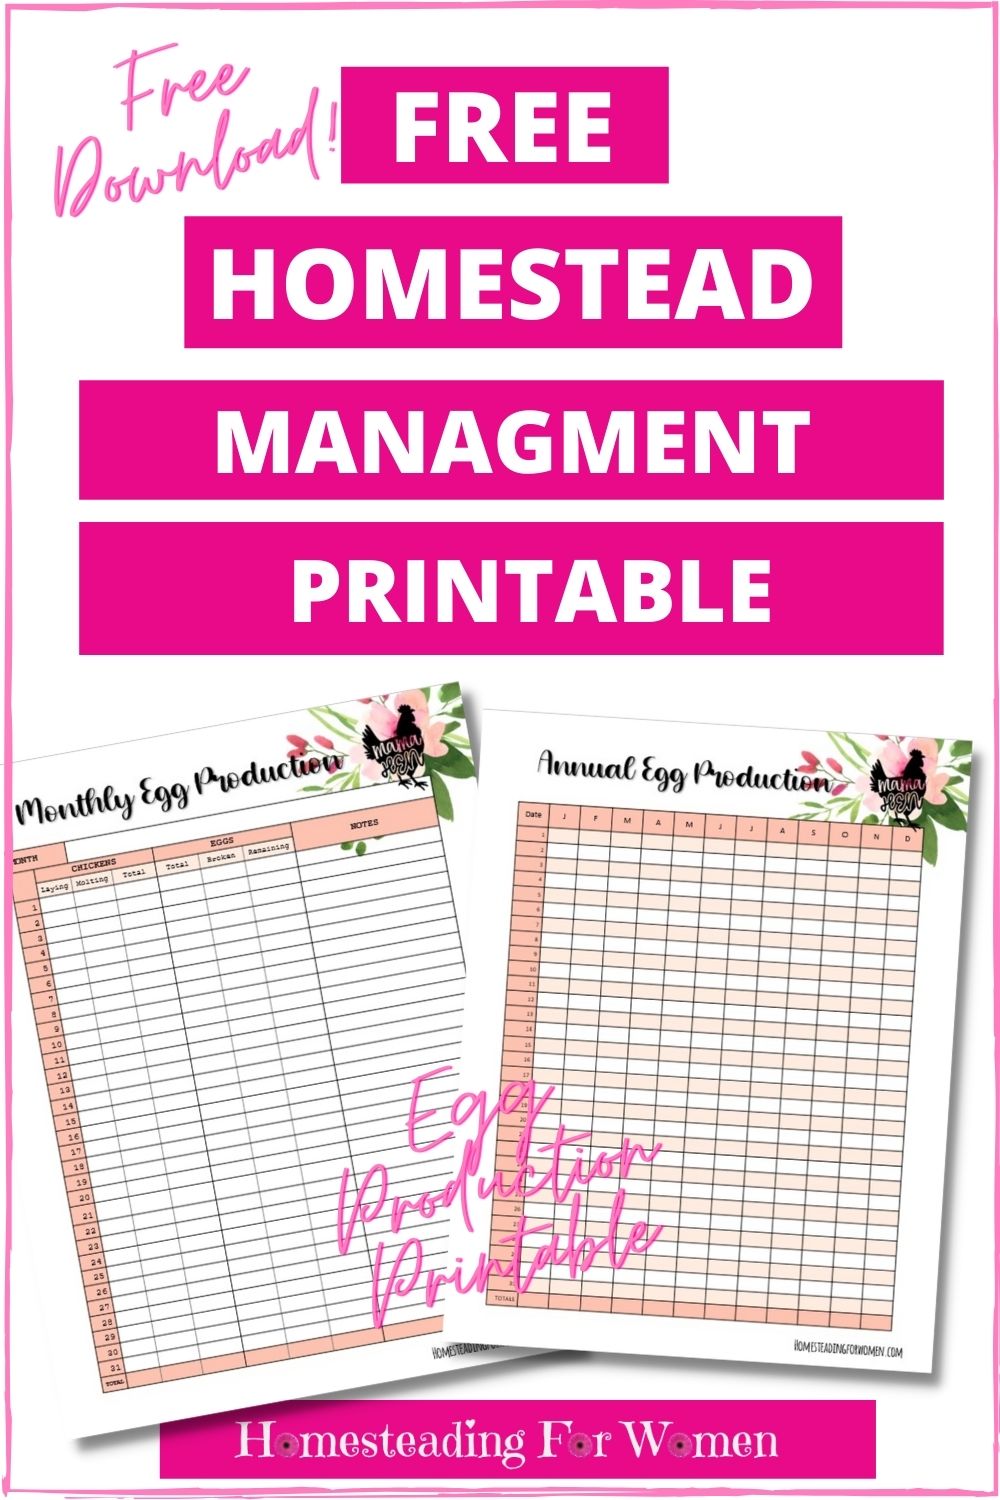 Free Urban Homestead Management Printables Egg Collection Tracker Homesteading For Women